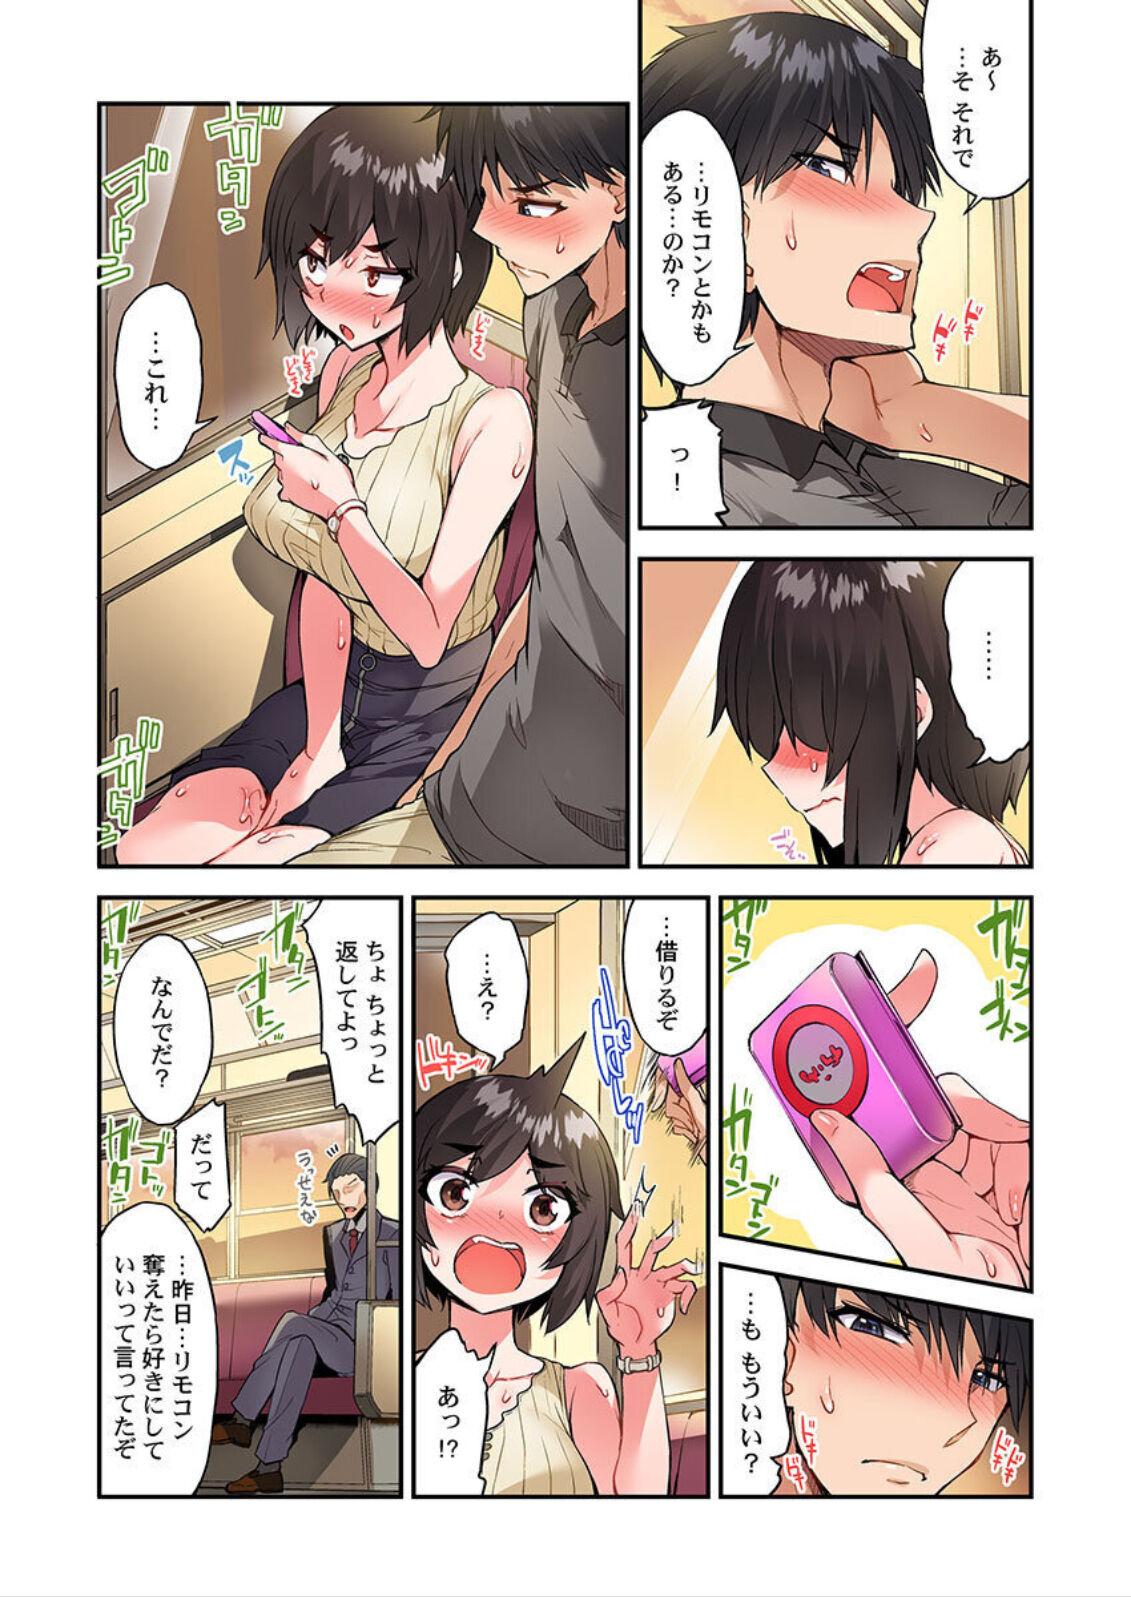 Traditional Job Of Washing Girls' Body Ch. 45-51 and brand new CH. 57 92